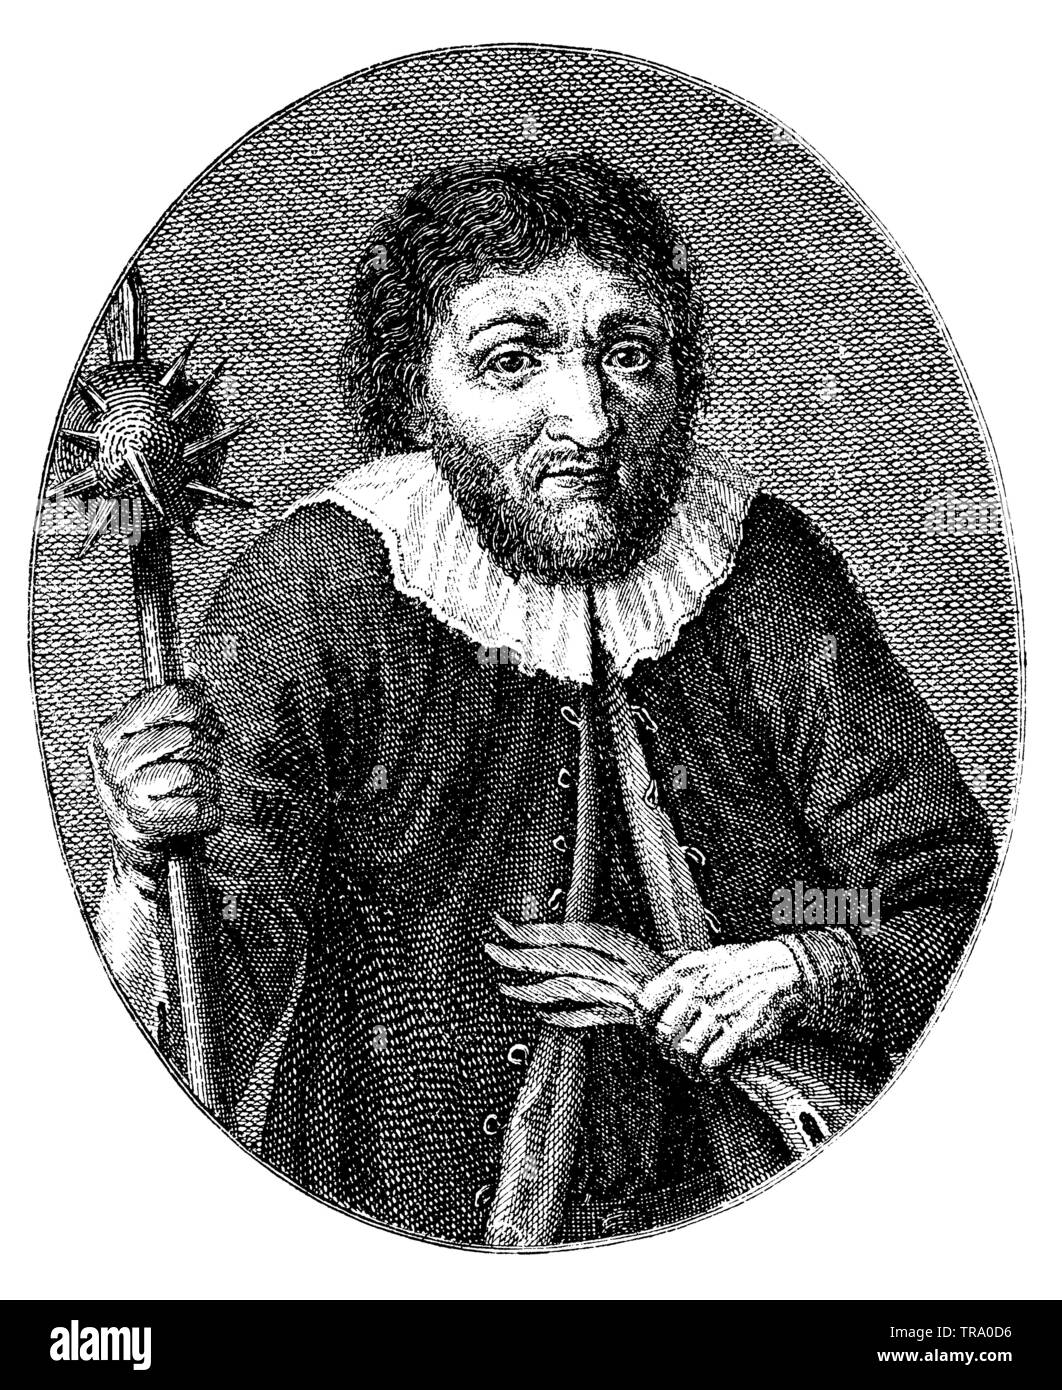 Stephan Fadinger (1585-1626), farmer, hatter and chief captain of the rebellious farmers of the Traun- and Hausruckviertel in Upper Austria's Peasant War, ,  (history book, 1902) Stock Photo